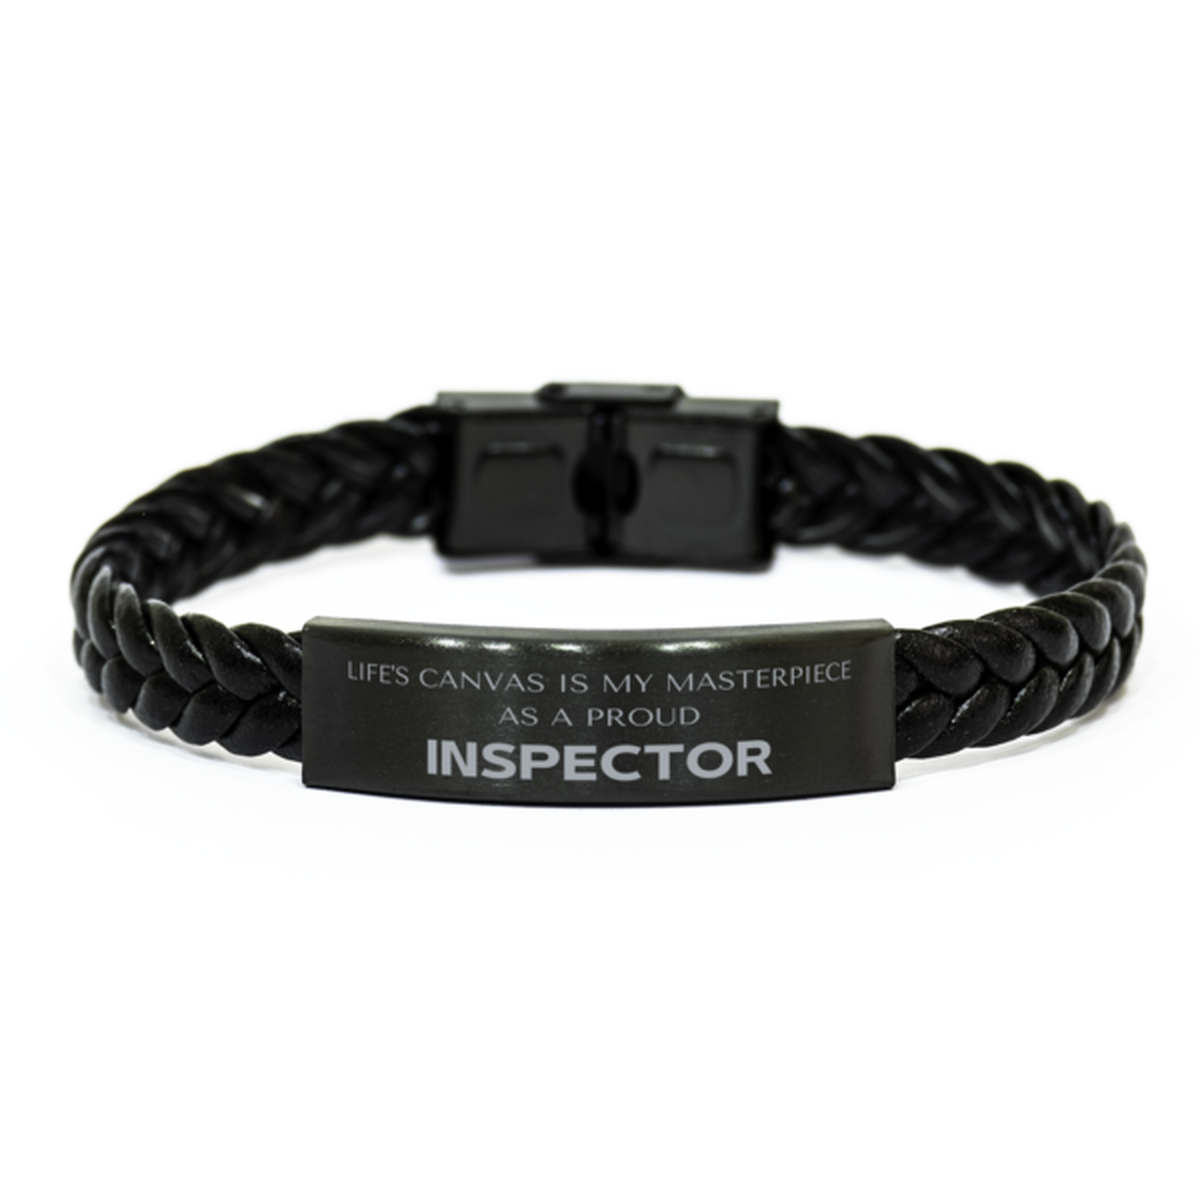 Proud Inspector Gifts, Life's canvas is my masterpiece, Epic Birthday Christmas Unique Braided Leather Bracelet For Inspector, Coworkers, Men, Women, Friends